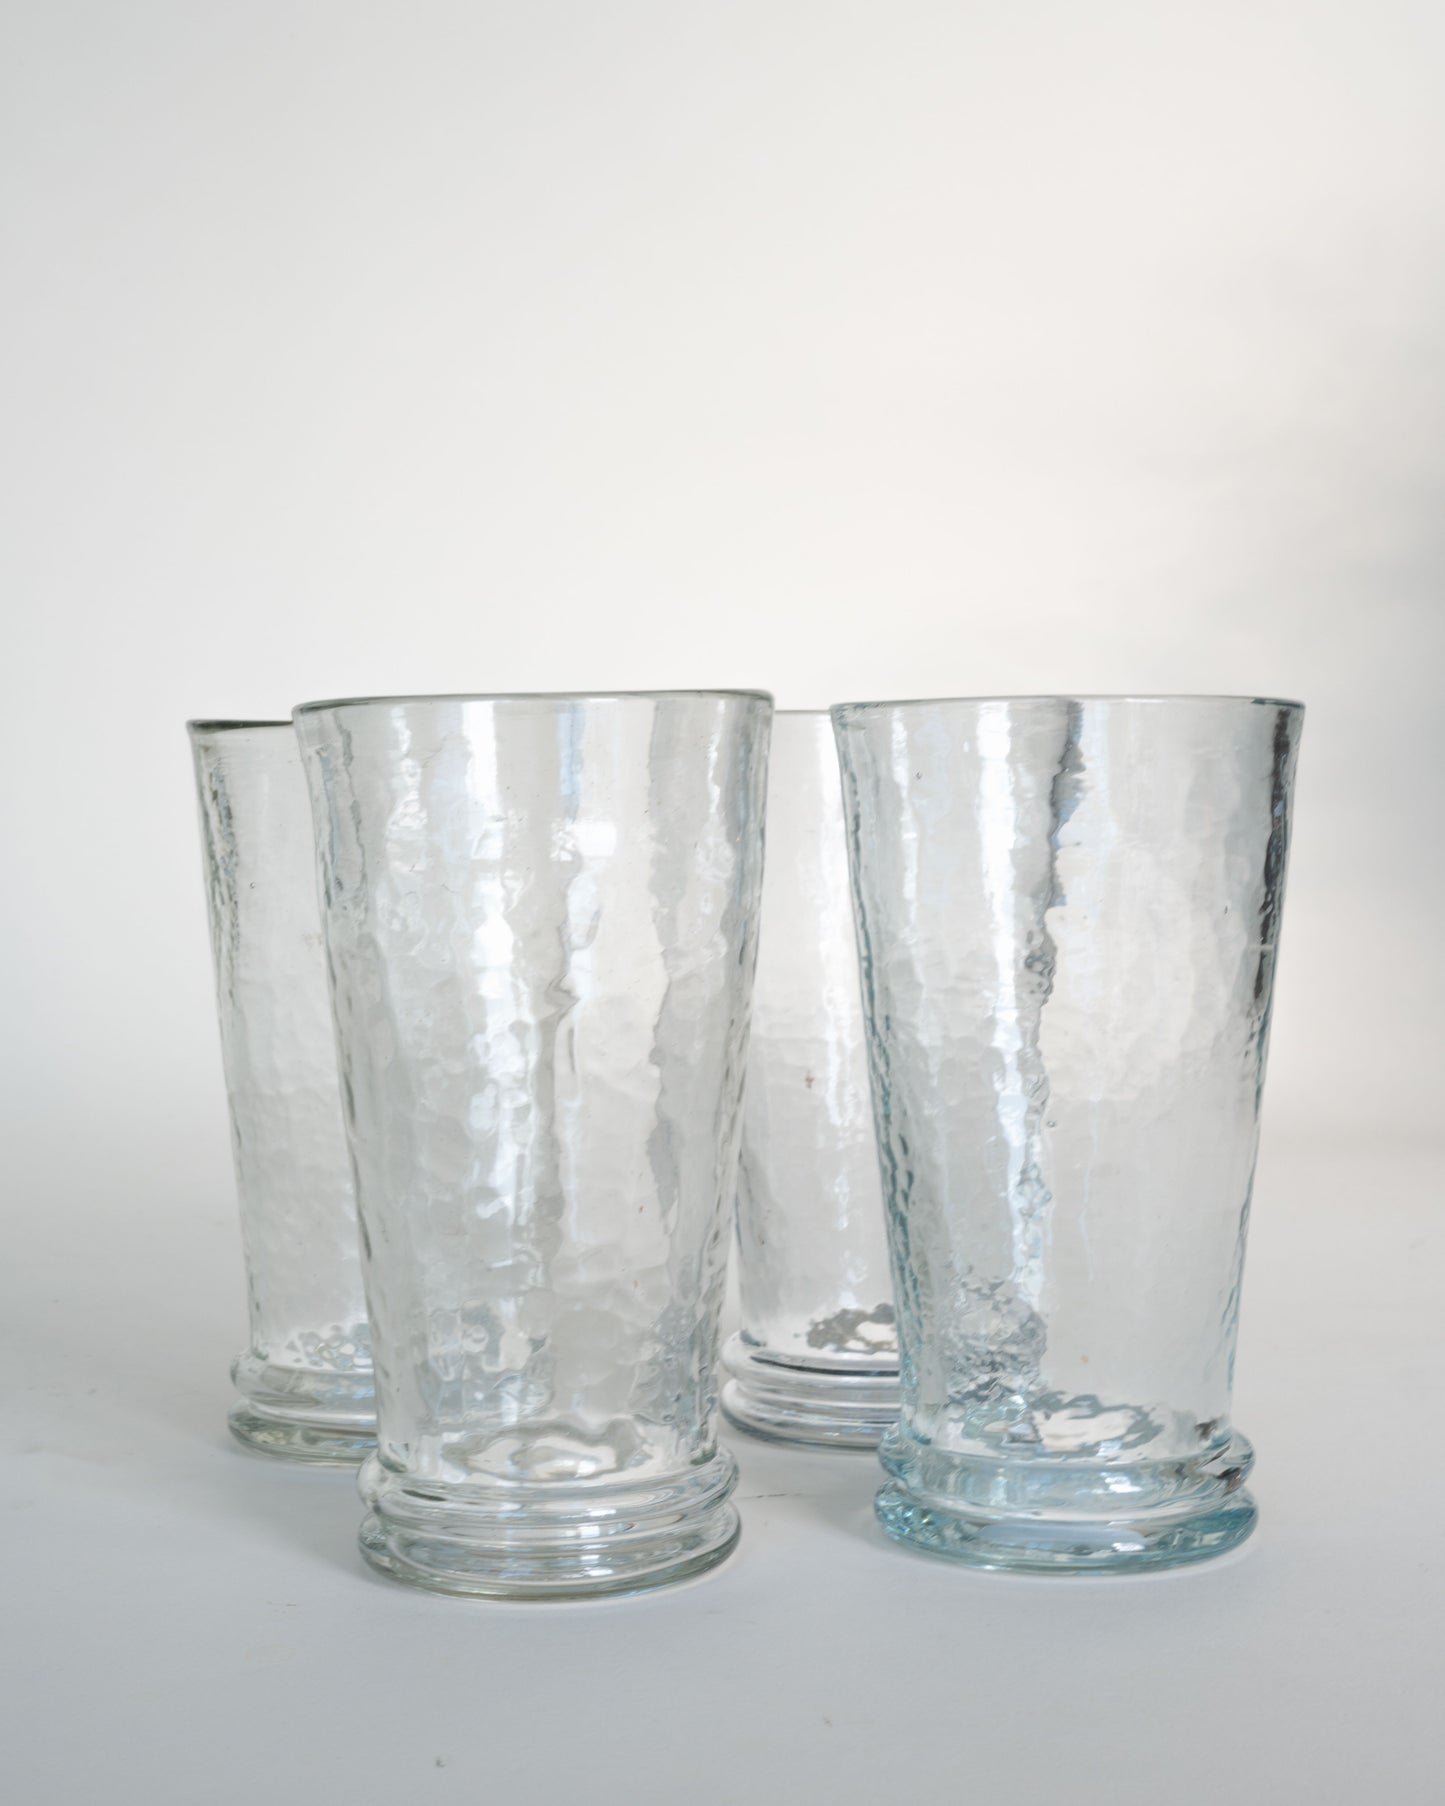 Recycled Glass Drinking Glass